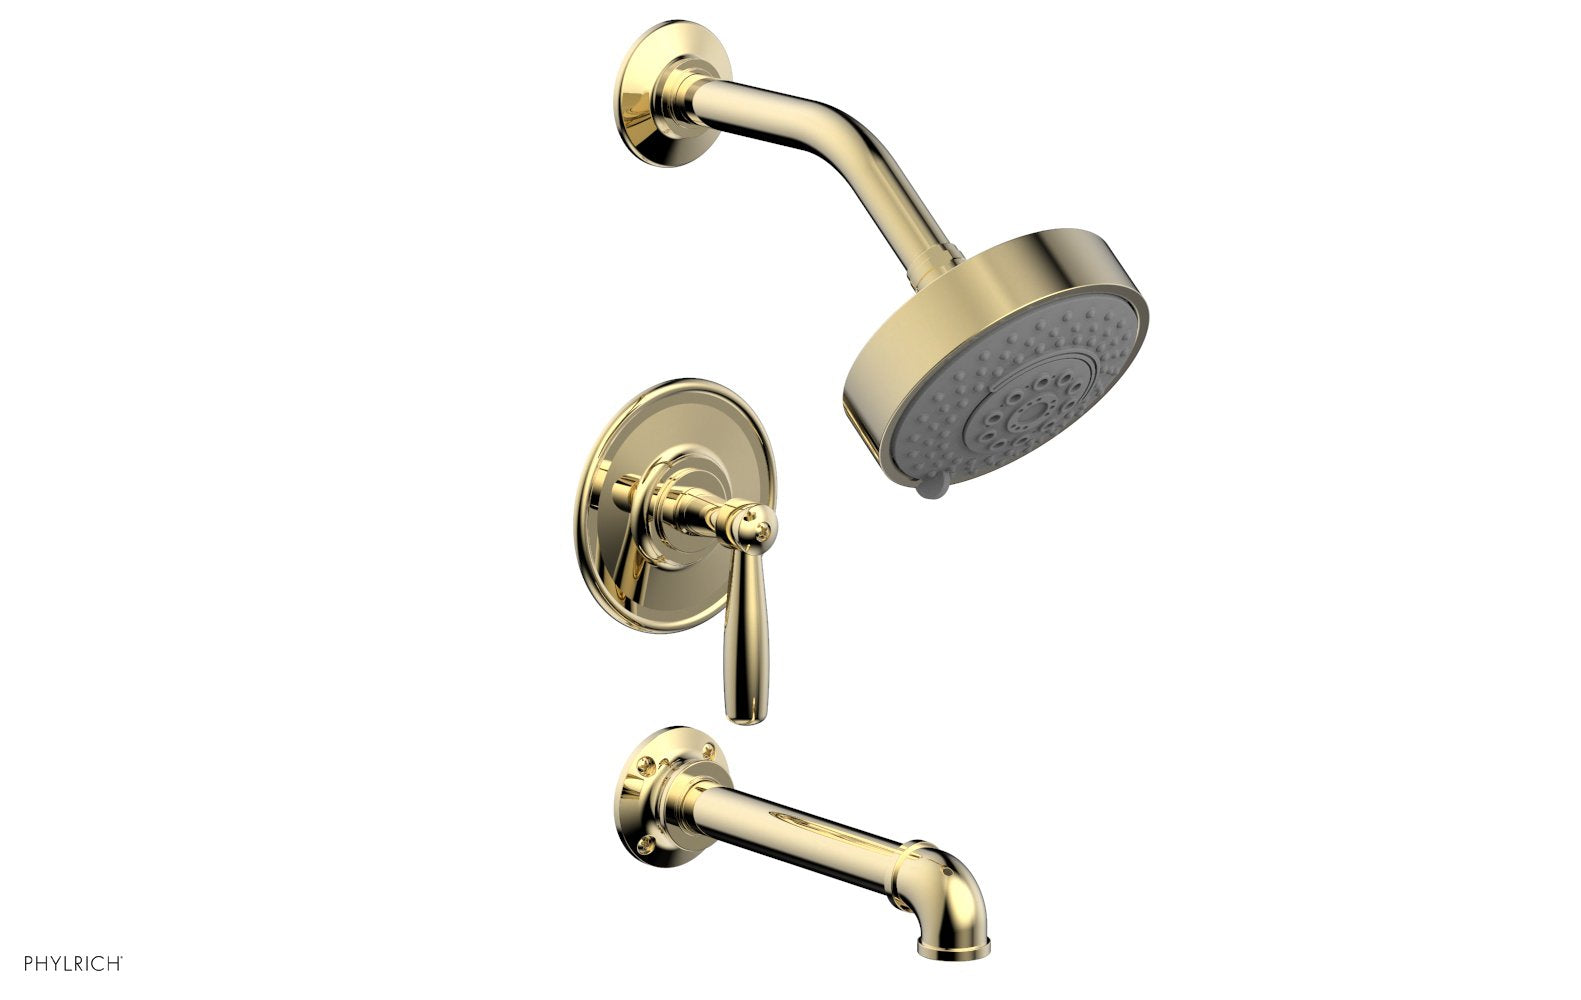 Phylrich WORKS 2 Pressure Balance Tub and Shower Set - Lever Handle